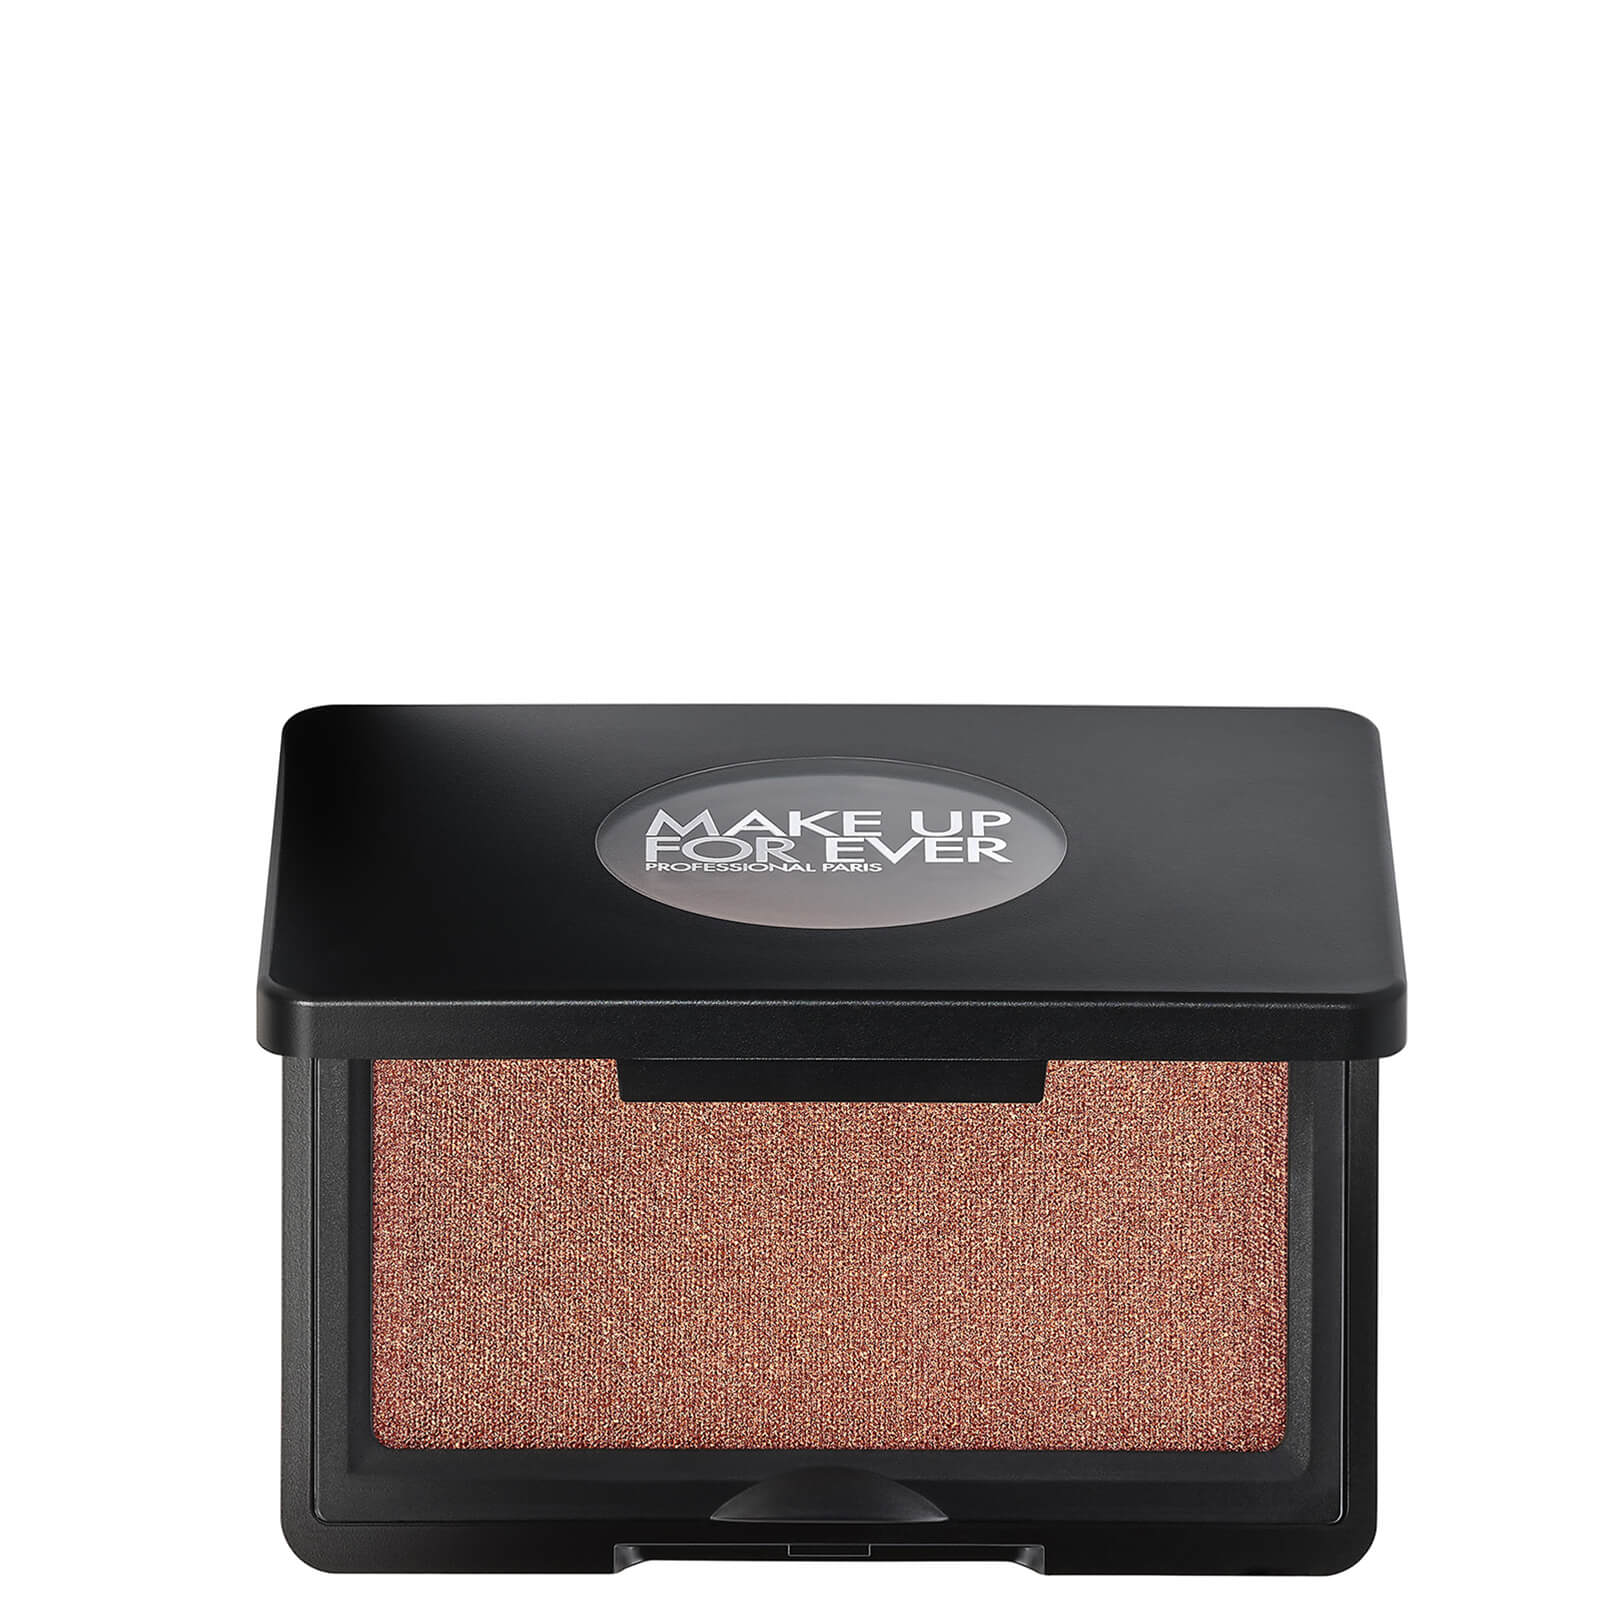 MAKE UP FOR EVER Artist Face Powders Highlighter 4g (Various Shades) - H170 - Limitless Cacao